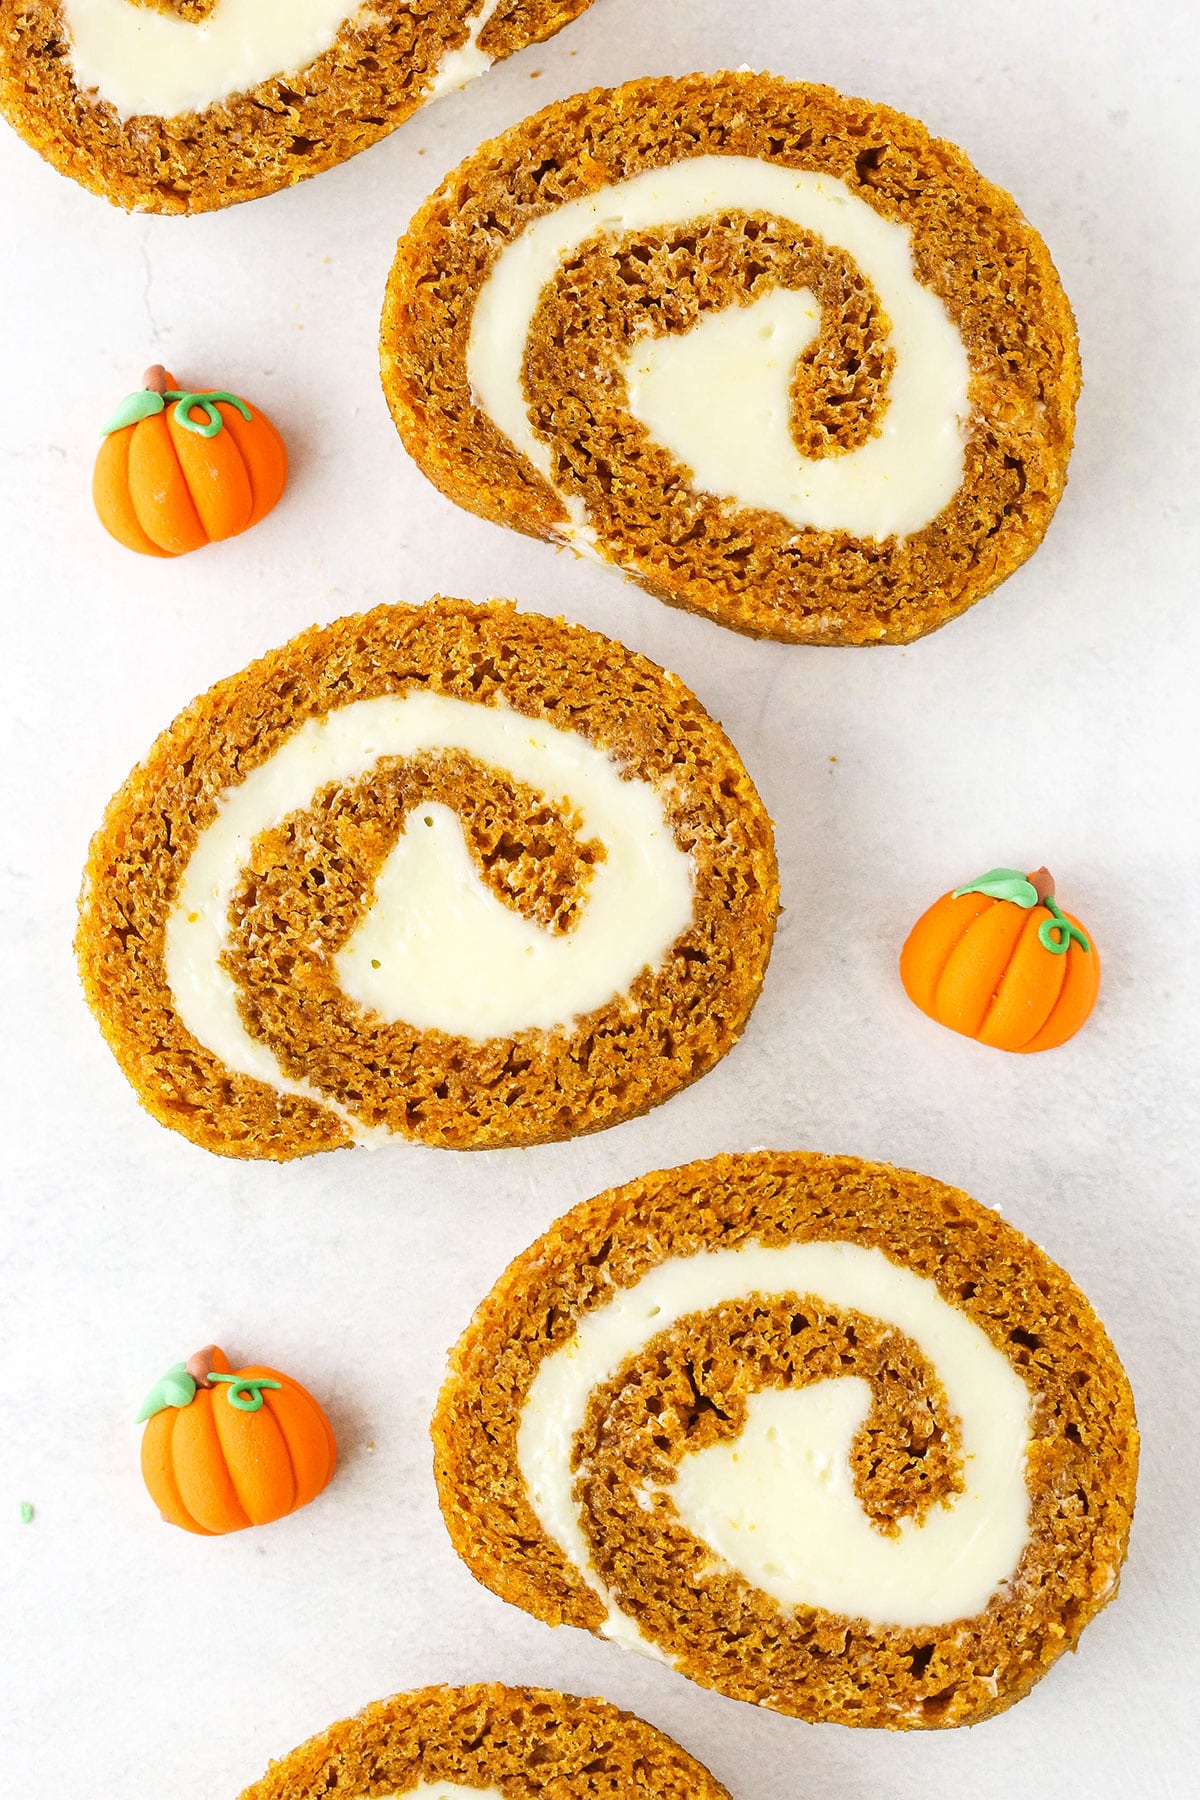 Overhead view of five slices of Pumpkin Roll Cake spread out on a white table with three pumpkin shaped candies